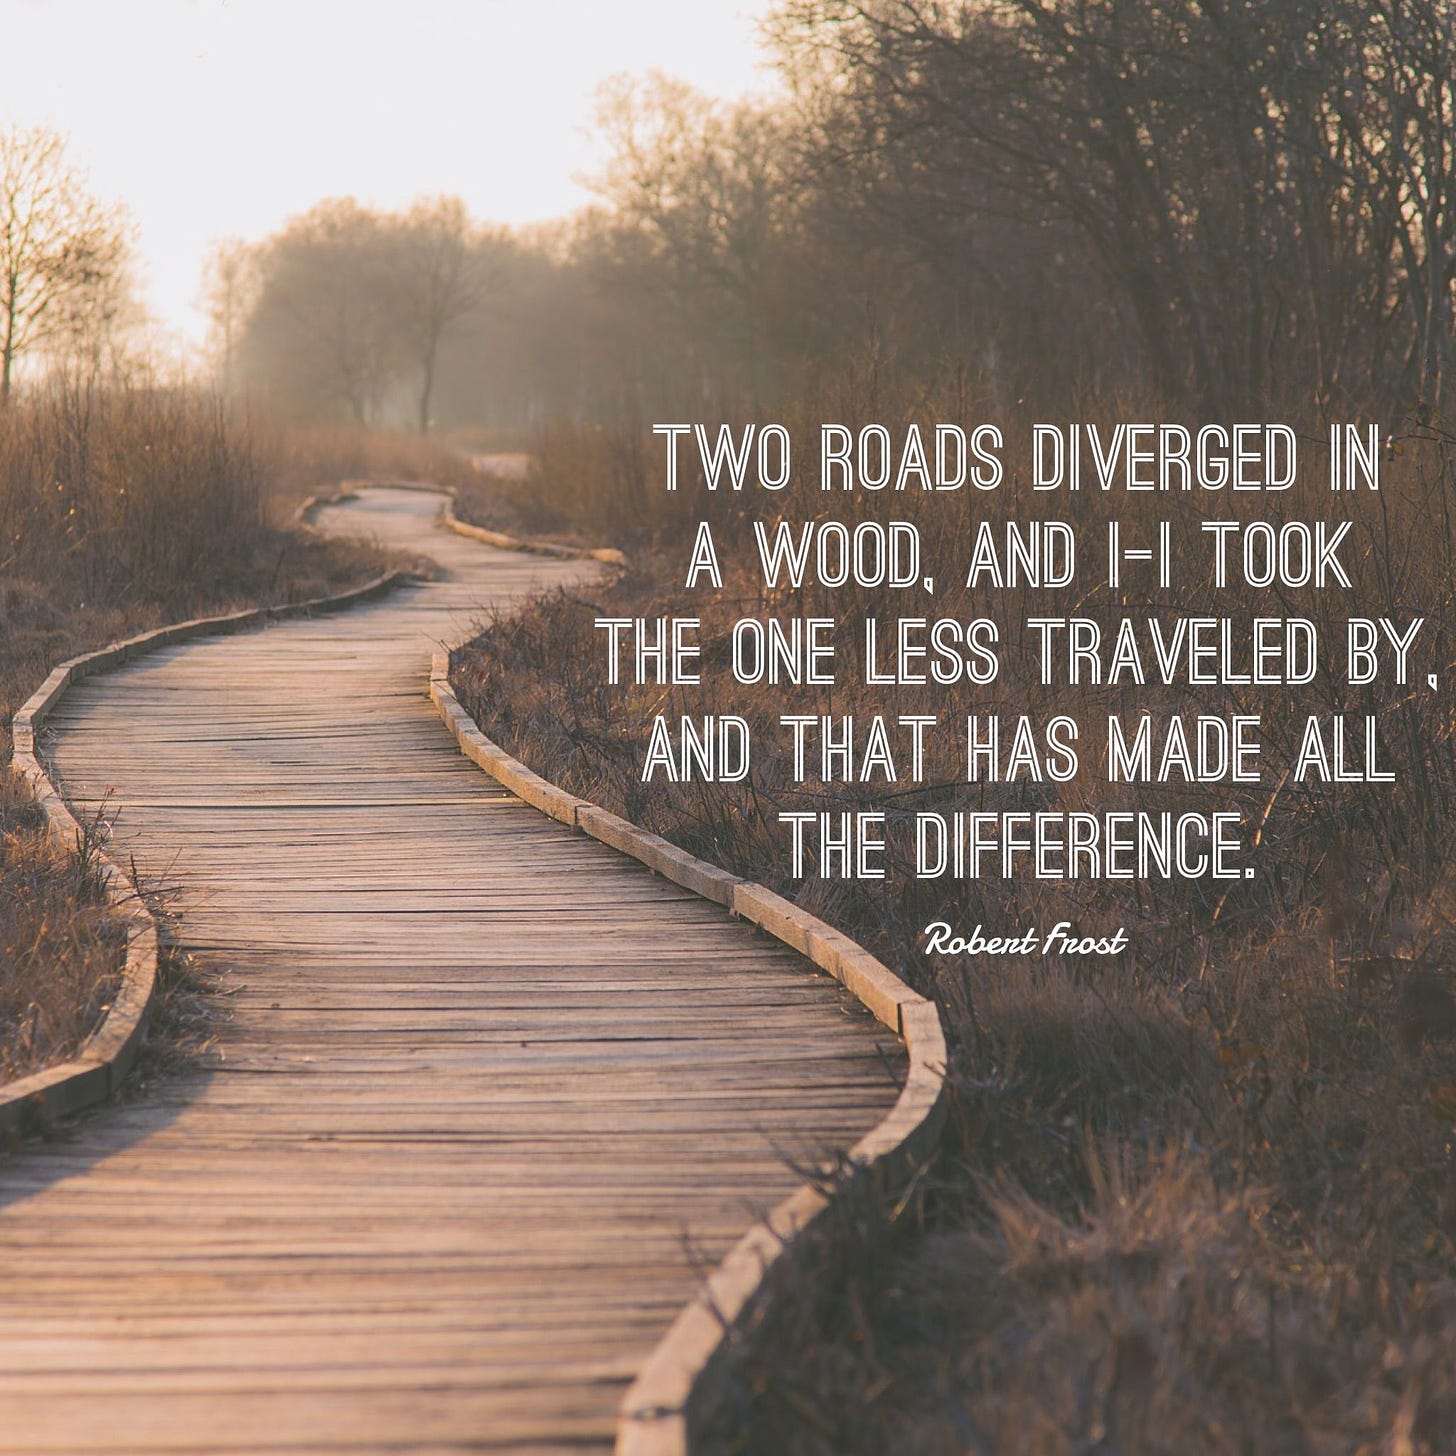 Two roads diverged in a wood and I – I took the one less traveled by, and  that has made all the difference – Robert Frost | hungryfaces